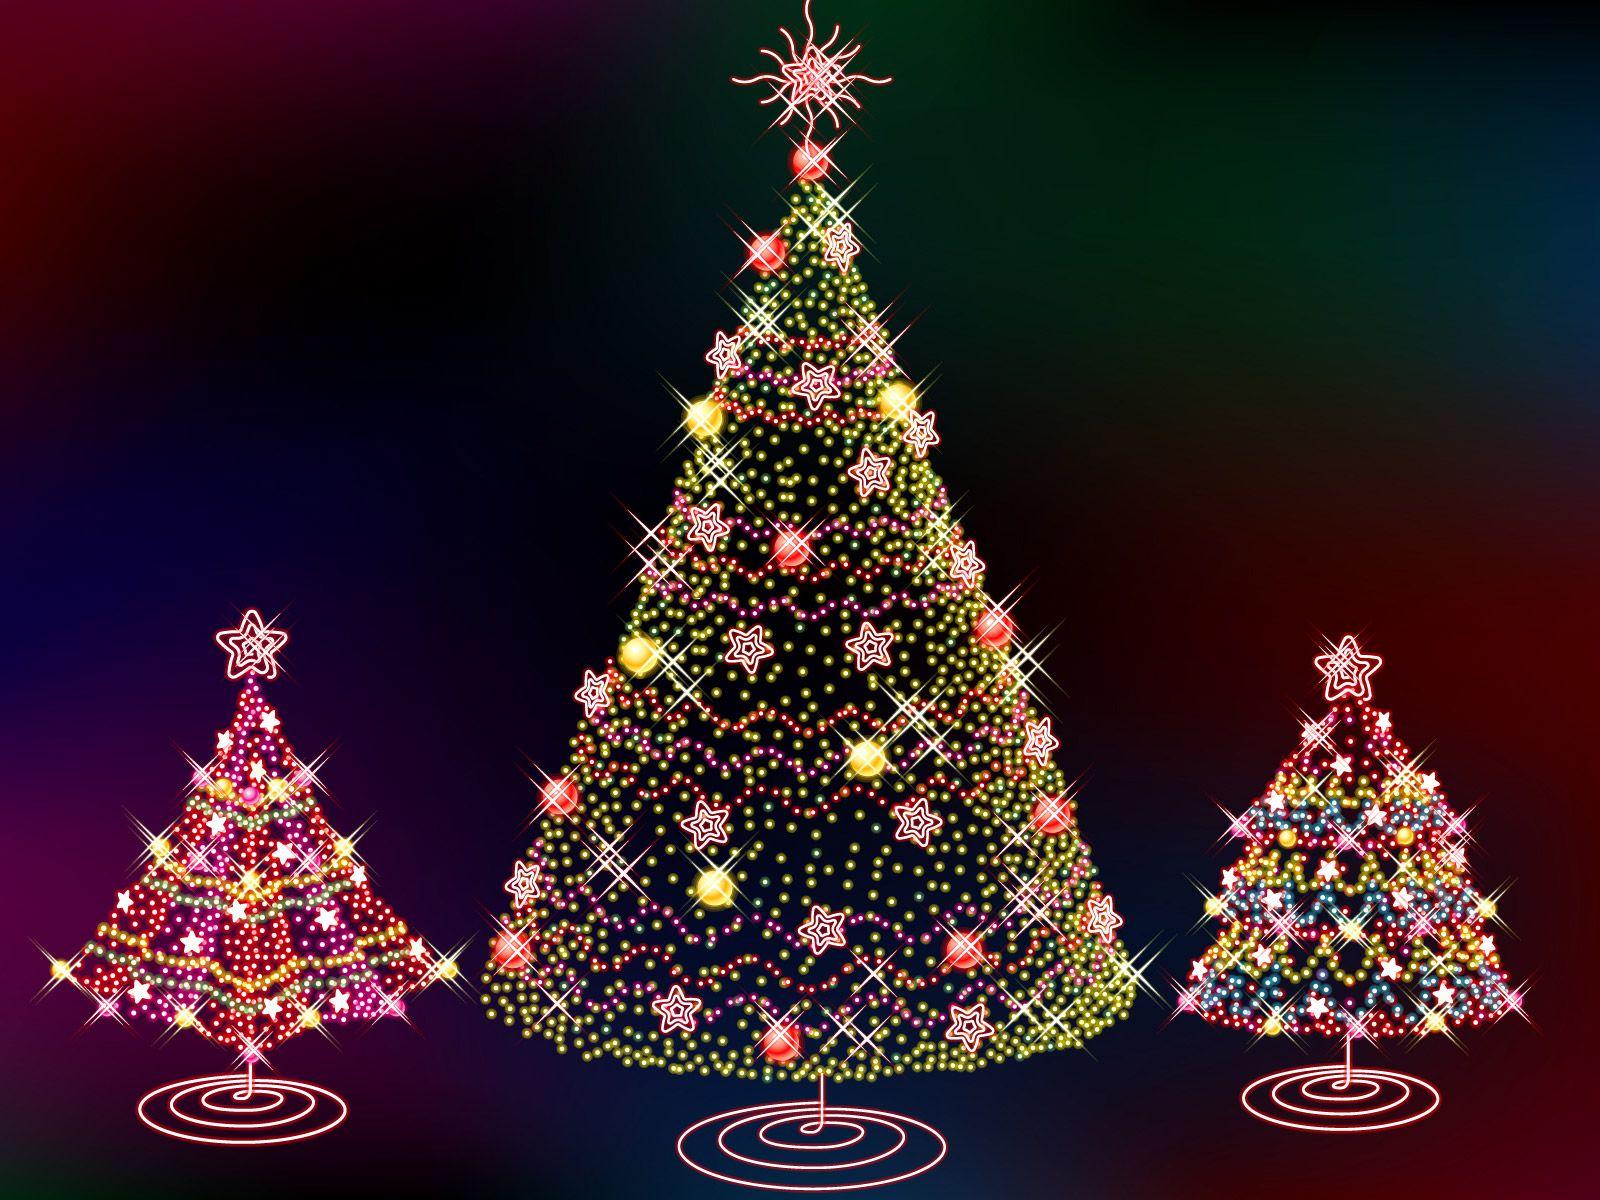 Cool Trend Funny Picture: Christmas tree wallpaper background